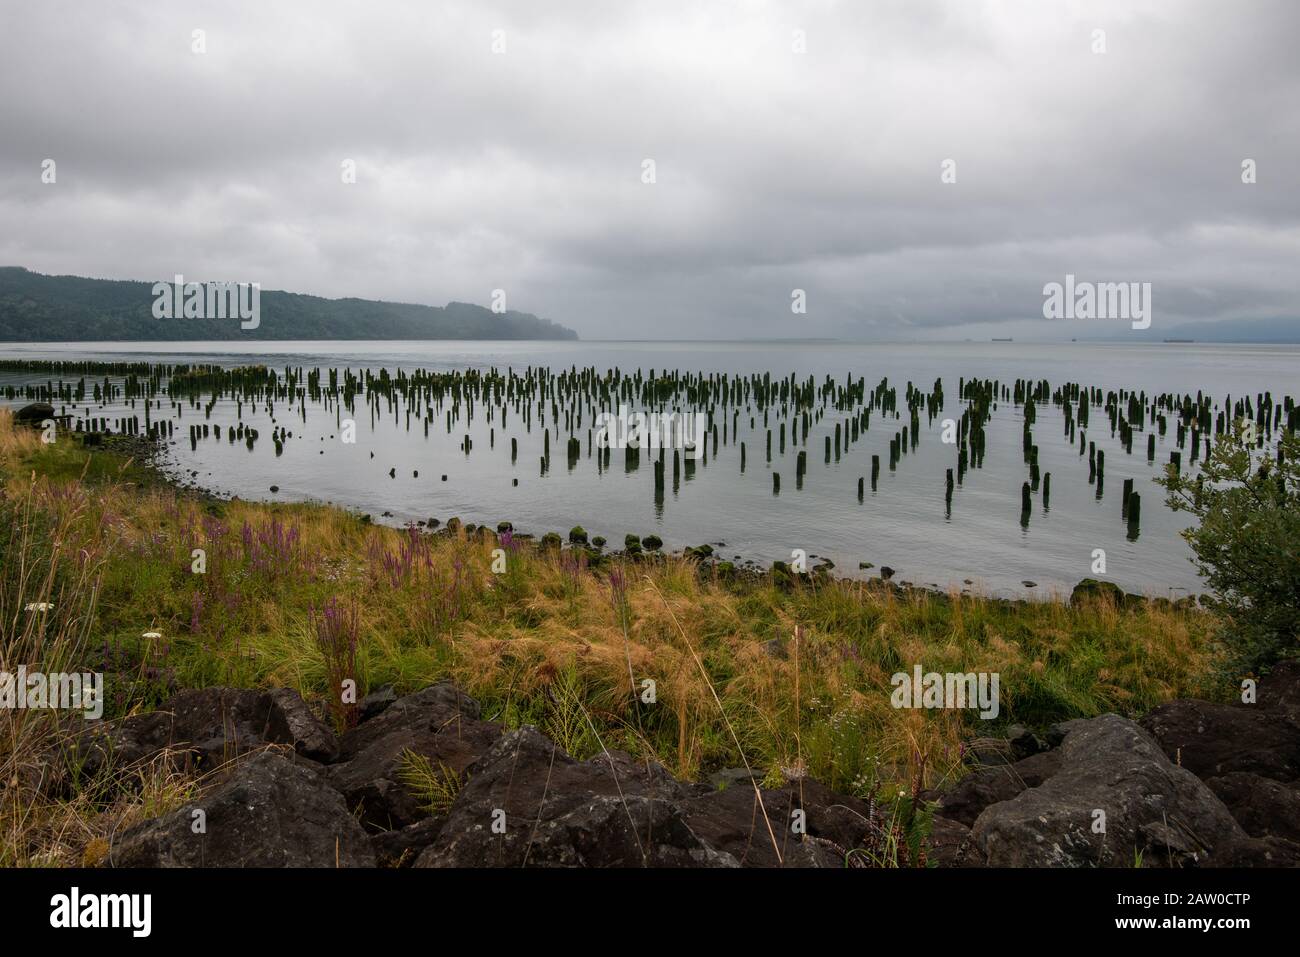 Hundreds of wooden pilings along the shore of the Columbia River in Oregon. Stock Photo